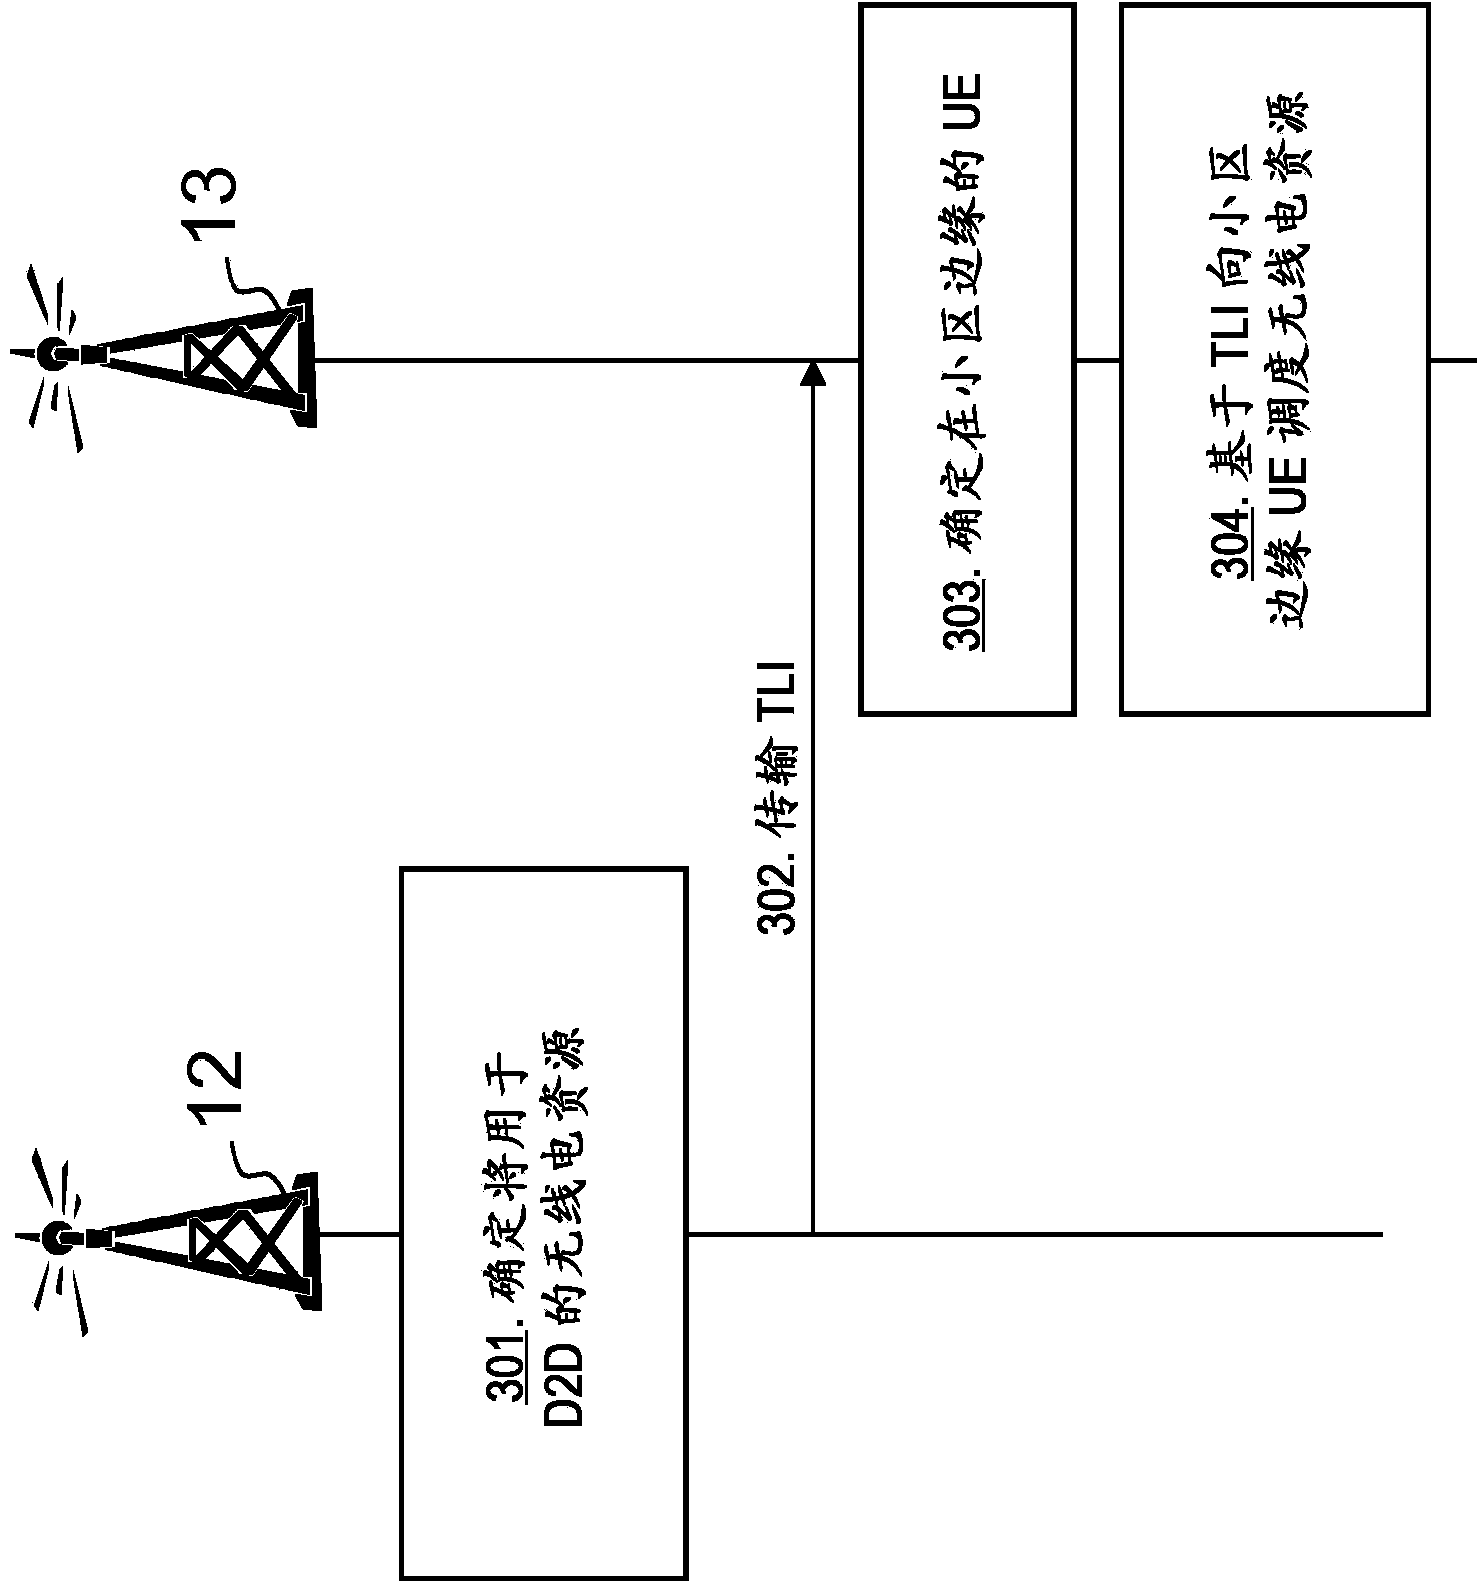 Radio base stations and methods therein for handling interference and scheduling radio resources accordingly